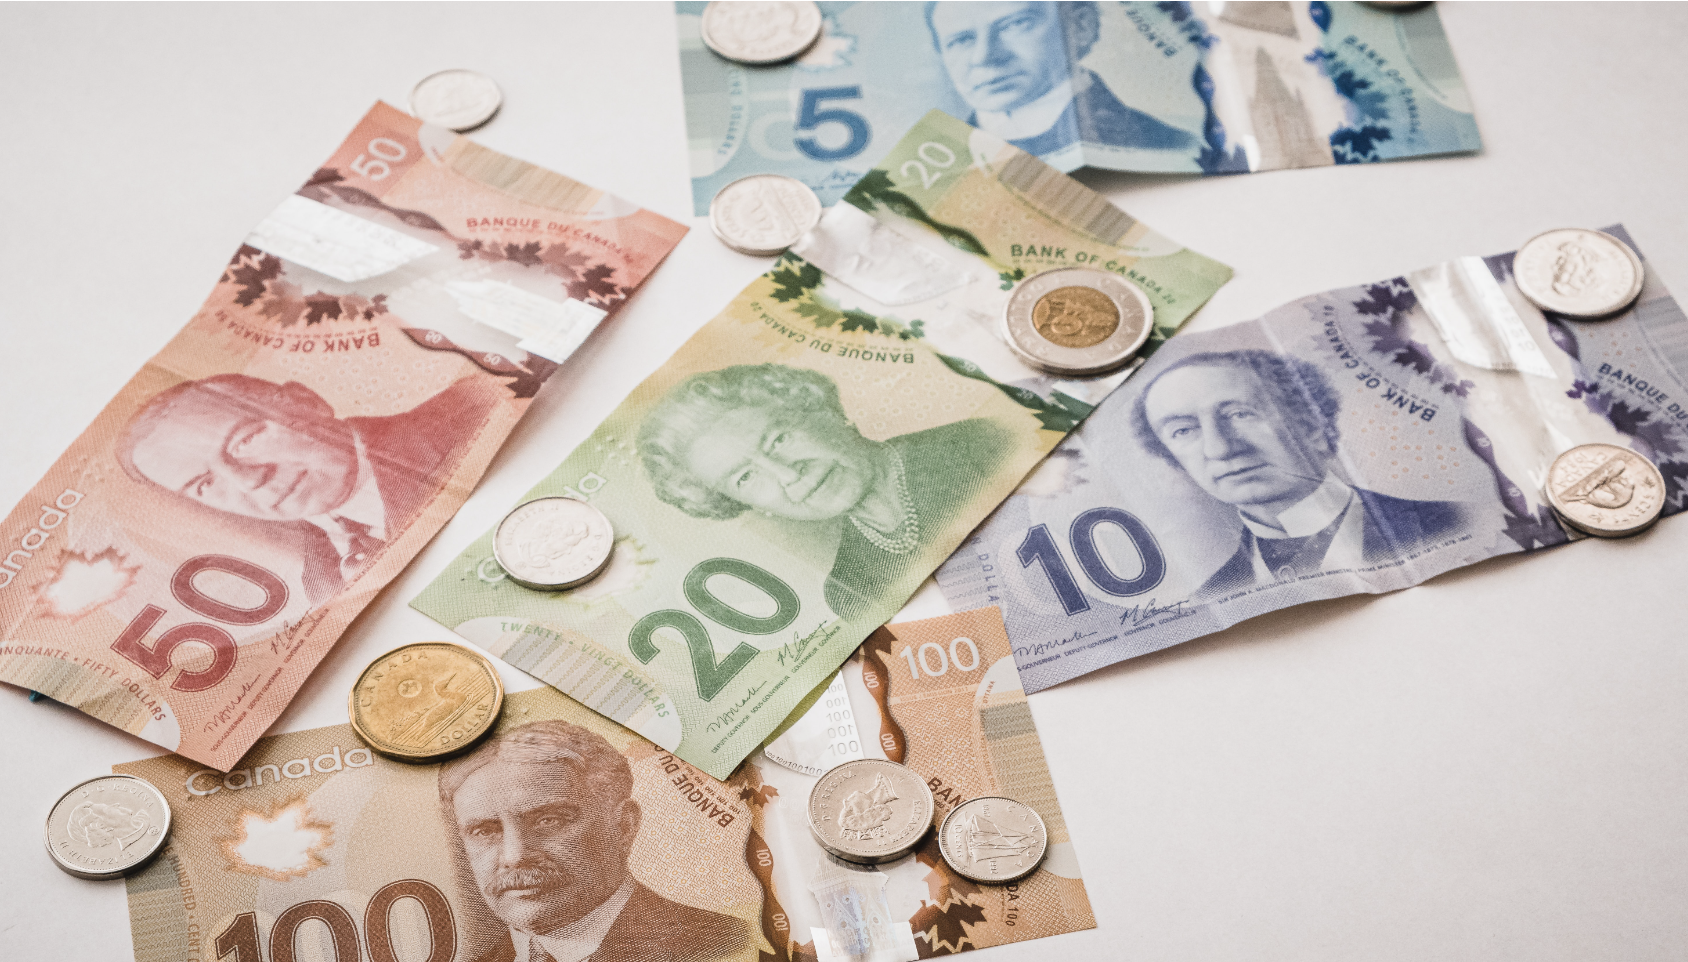 Buy Sell Love Durham featured blog image, Canadian money